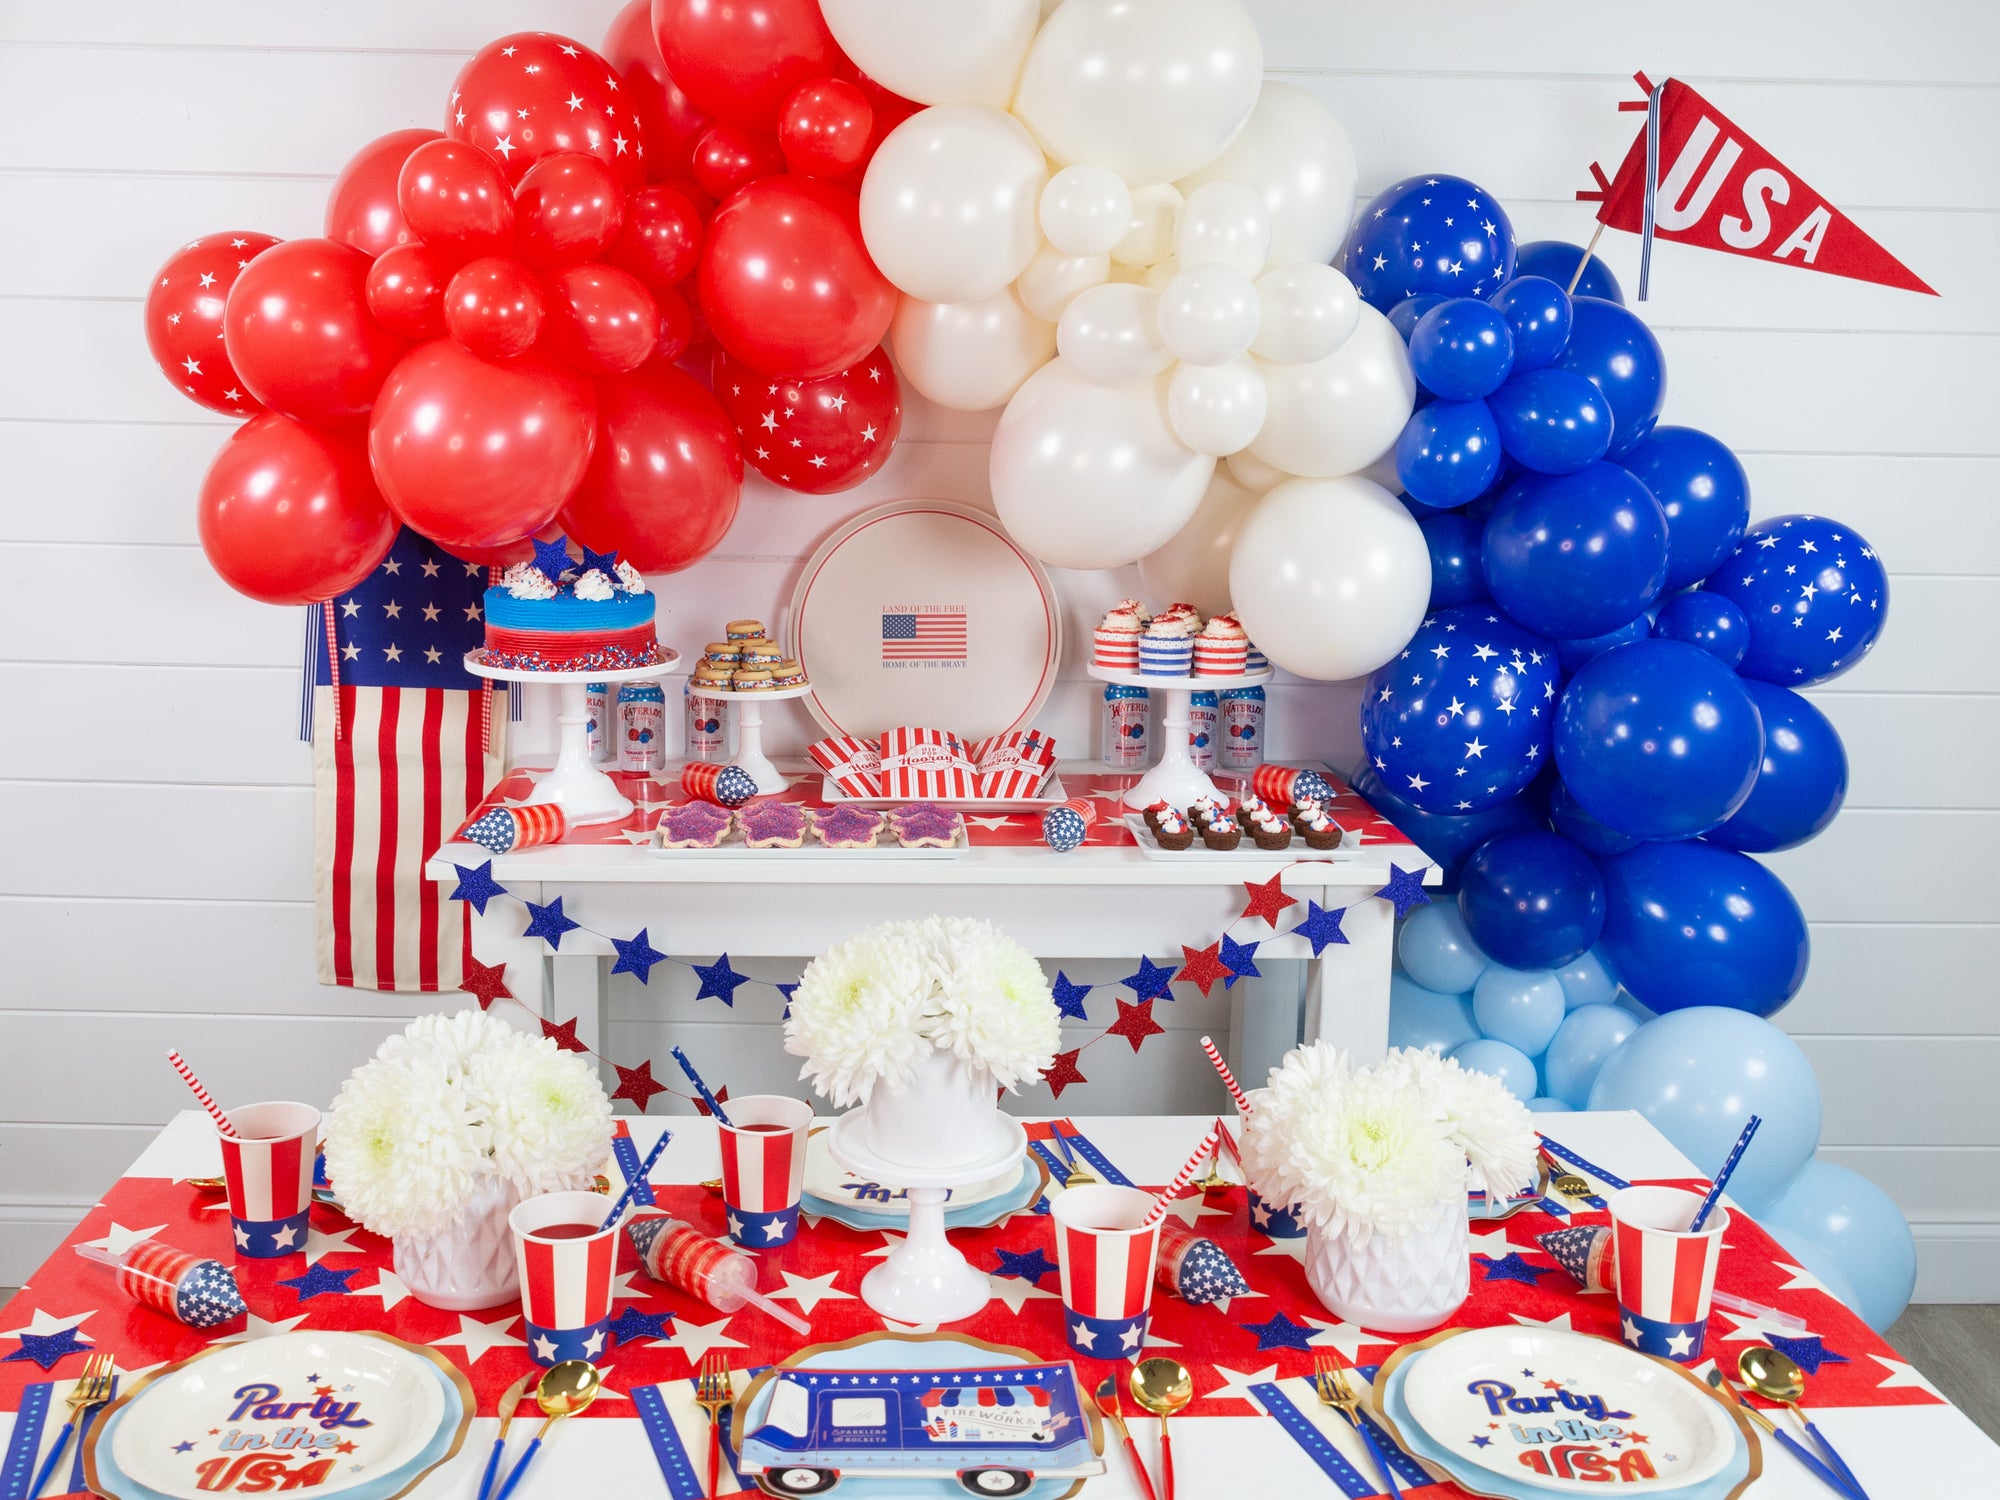 Patriotic Party Ideas to Party Like it's 1776! | The Party Darling